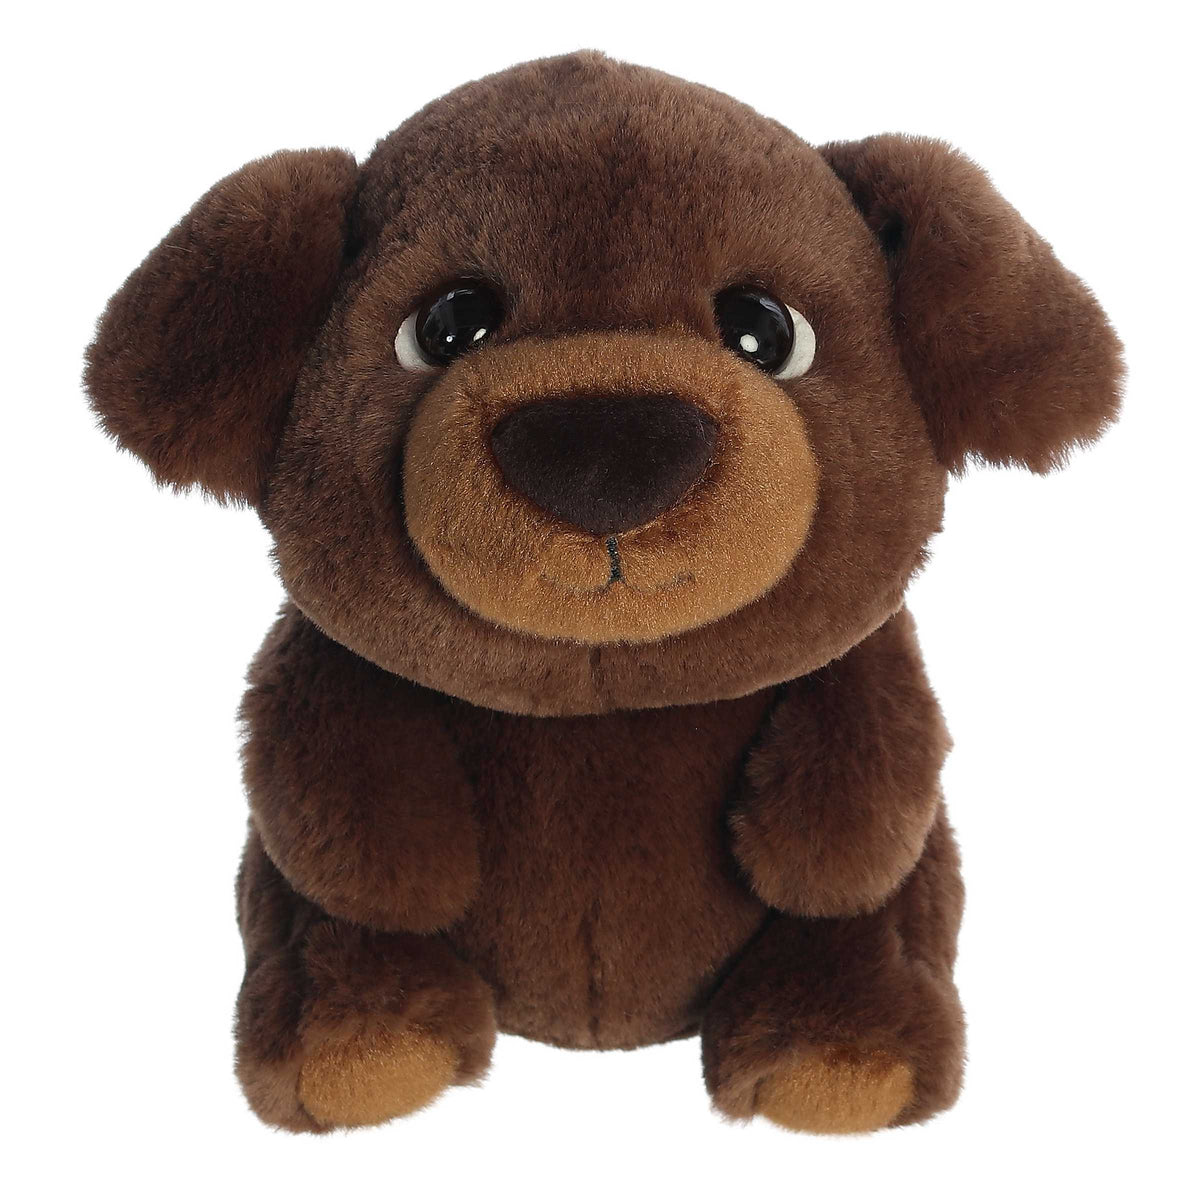 Adorable chocolate labrador puppy Stuffed animals with soft dark brown fur, dark brown accents on its nose, and shiny eyes